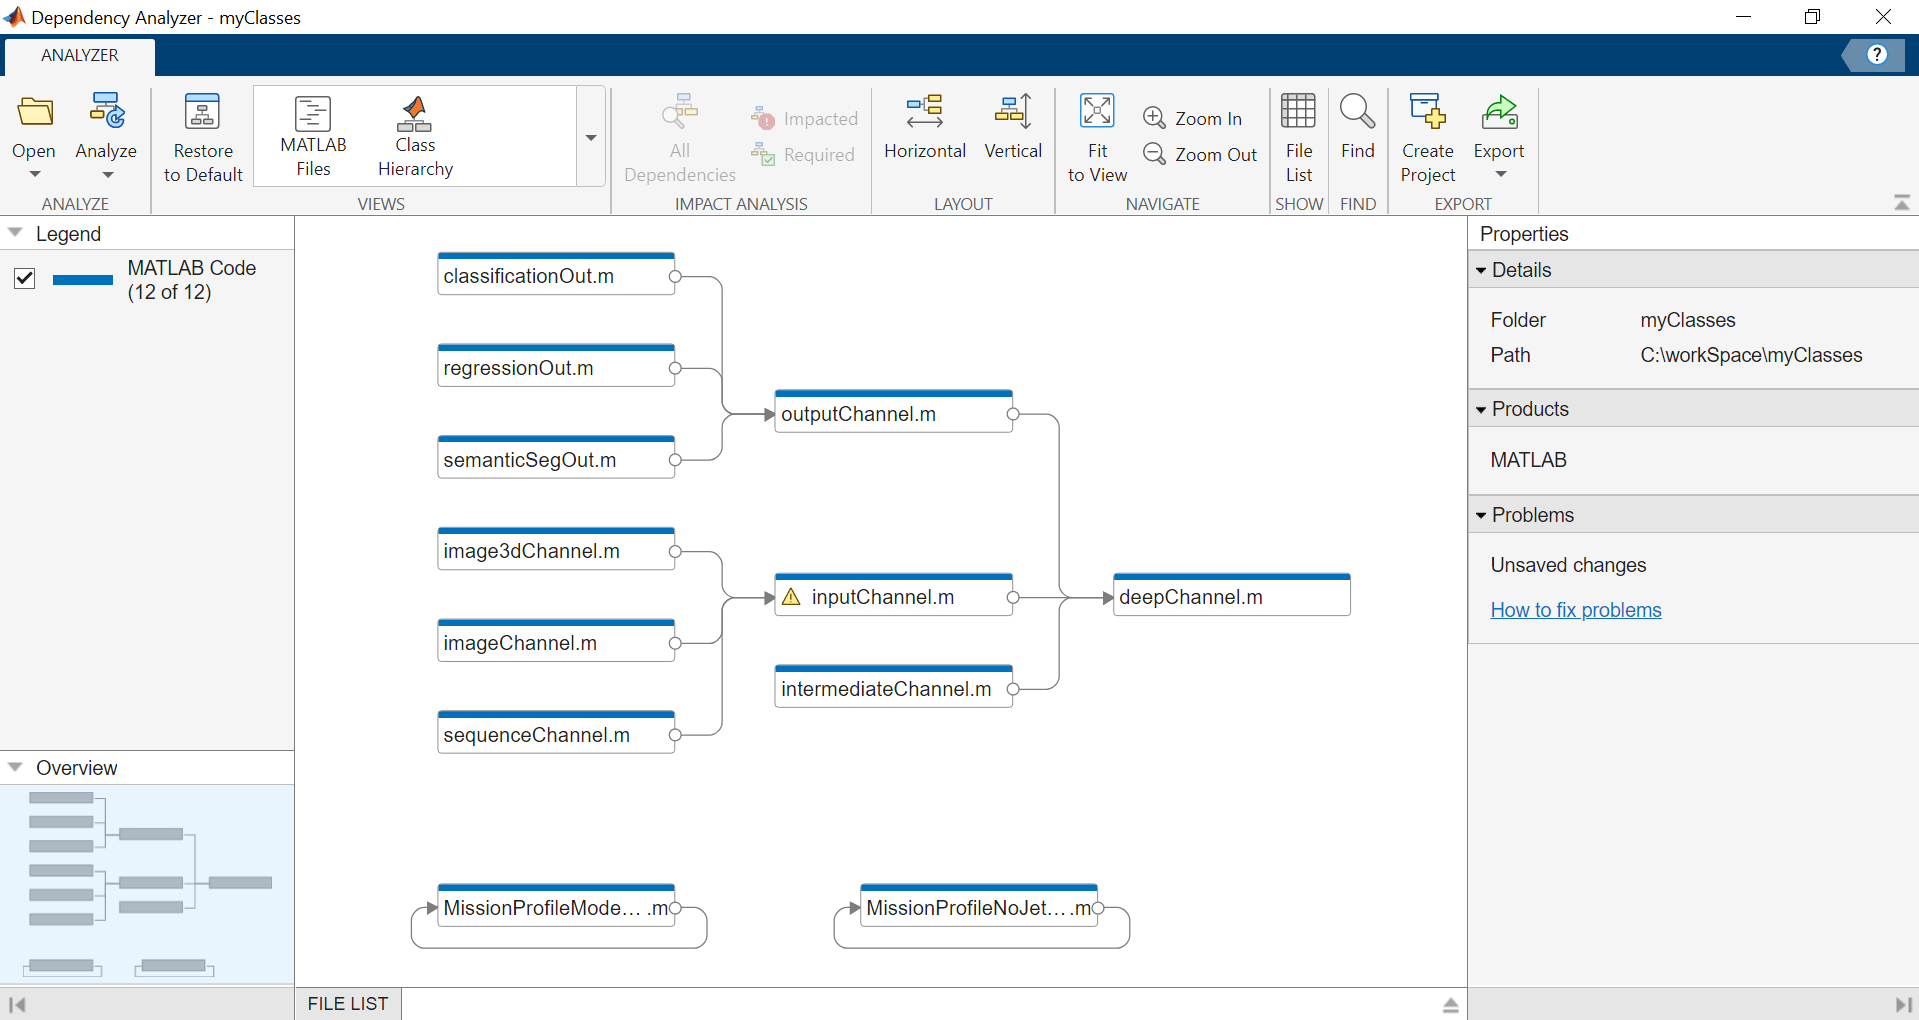 Dependency Analyzer default view. Dependency graph in the center, toolstrip on the top, Legend pane on the left, and Properties panel on the right.